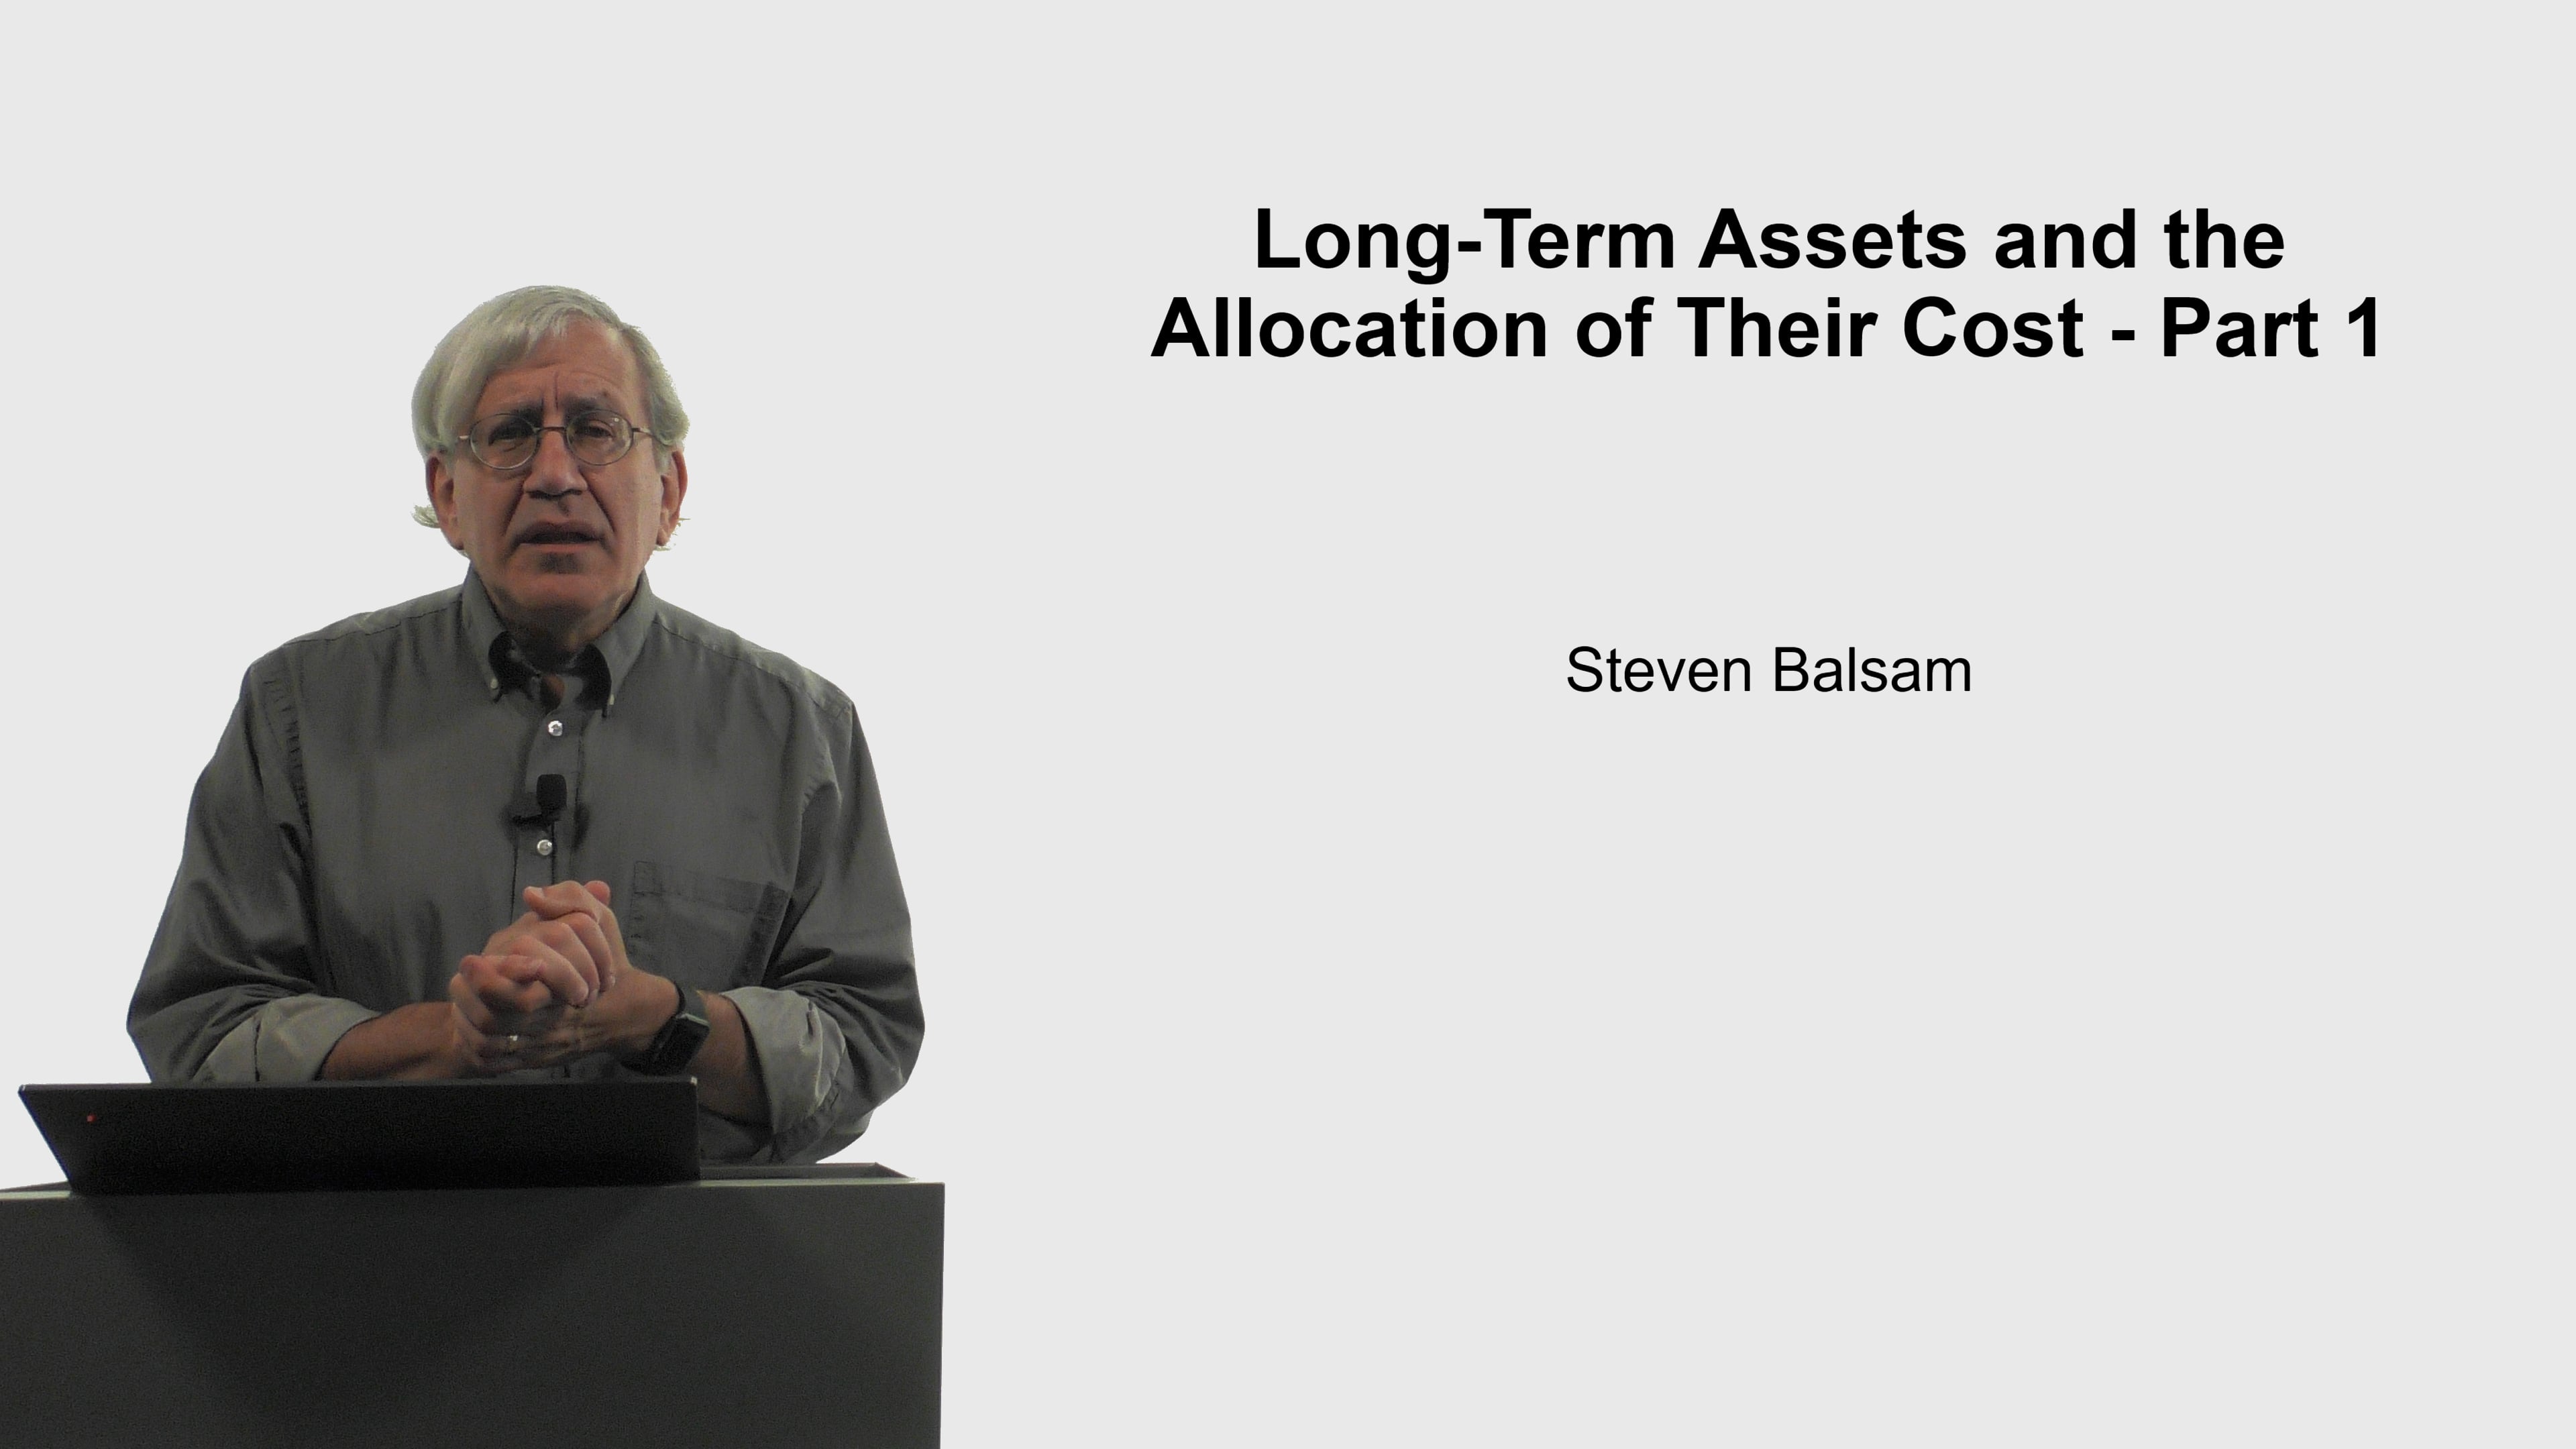 Long-Term Assets and the Allocation of Their Cost Part 1